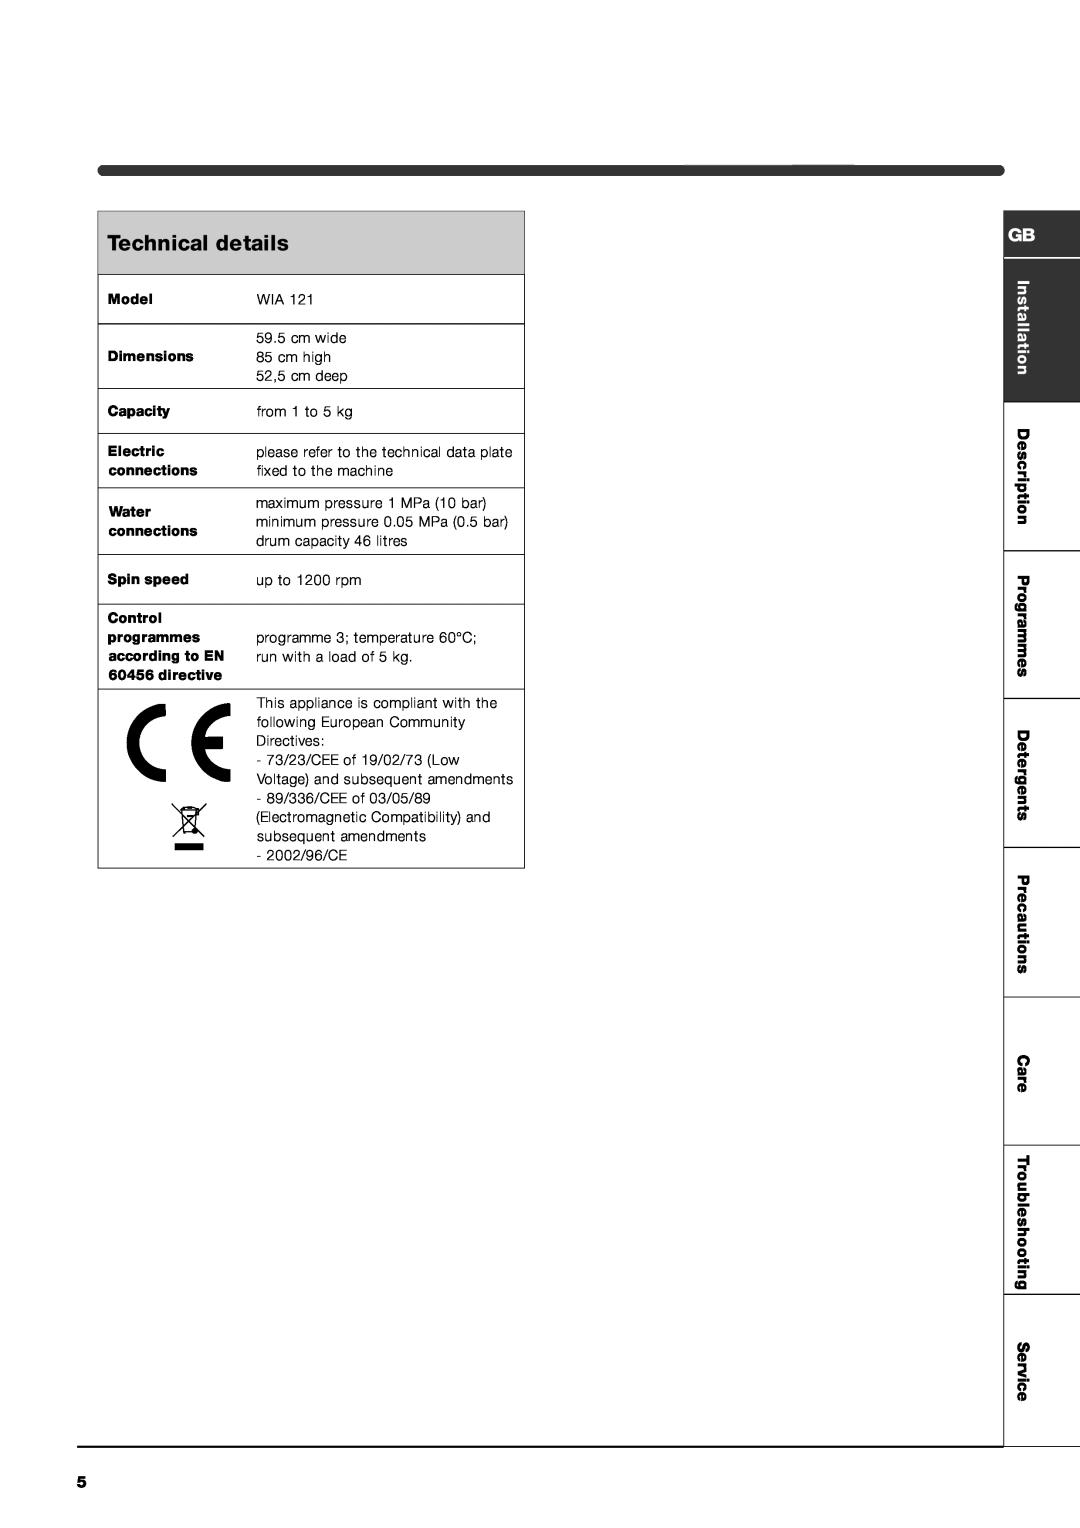 Indesit WIA 121 manual Technical details, Care Troubleshooting Service 